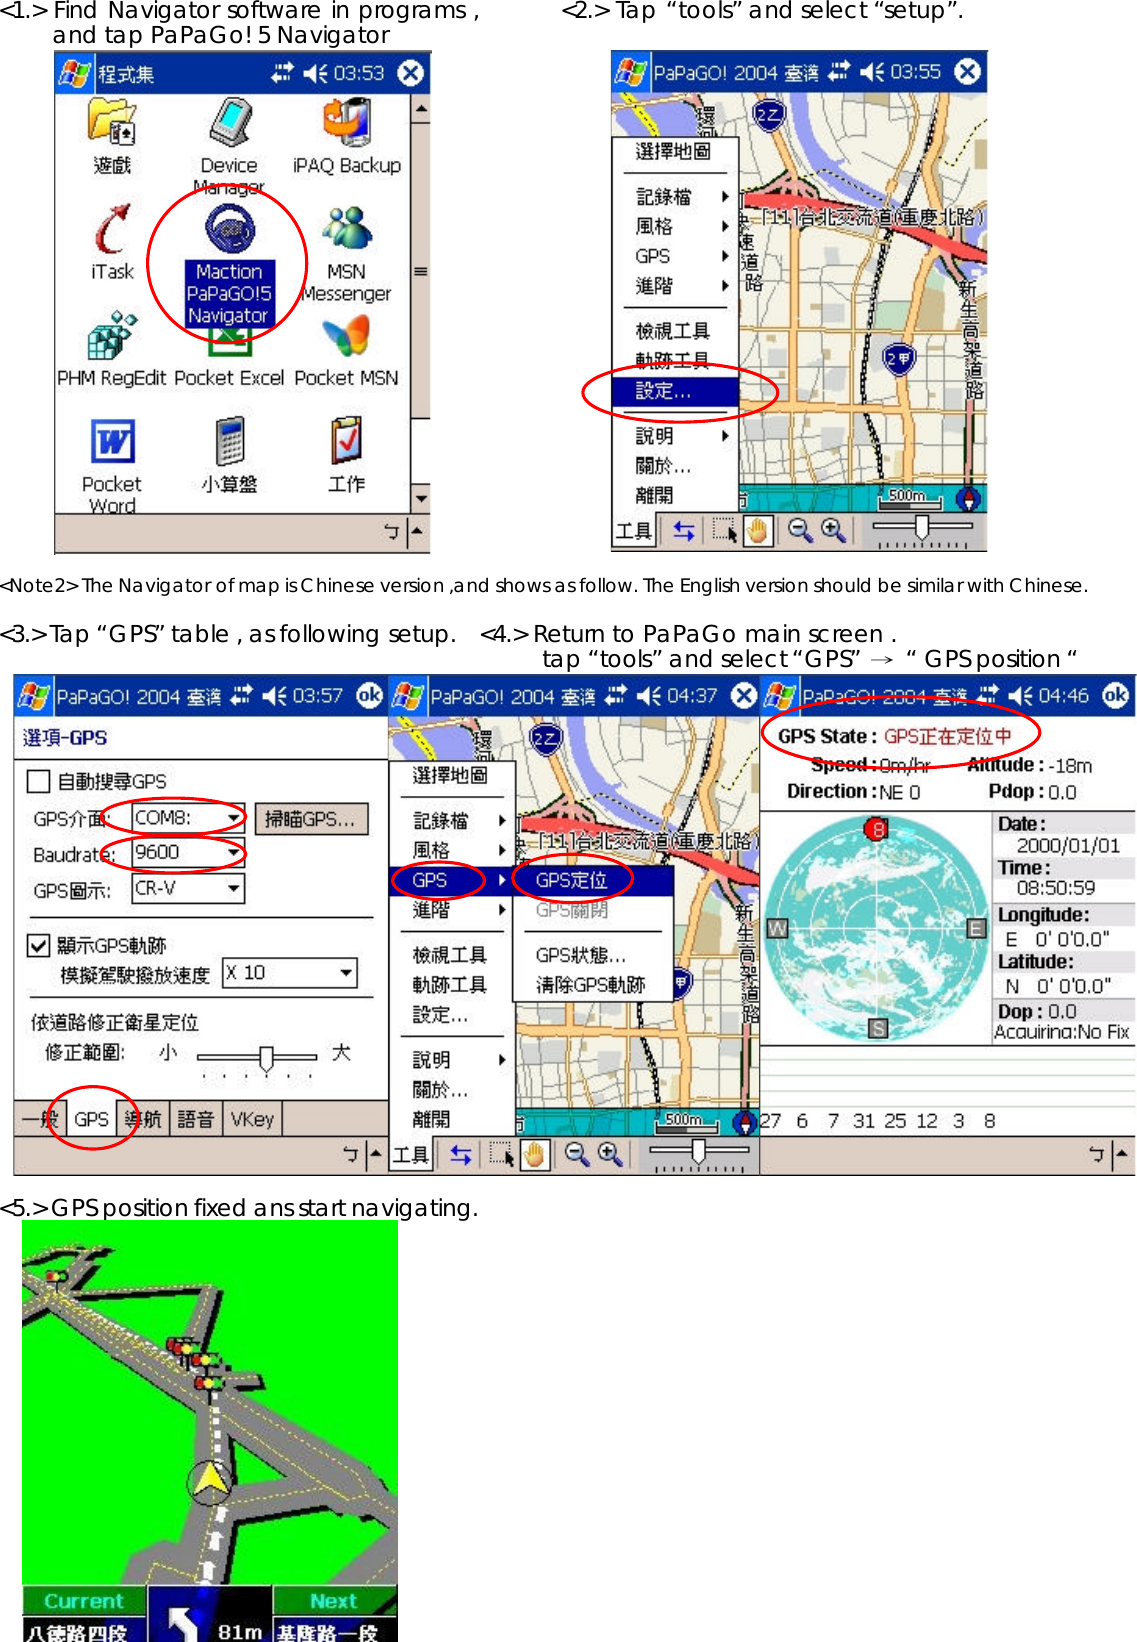 &lt;1.&gt; Find Navigator software in programs ,         &lt;2.&gt; Tap “tools” and select “setup”.and tap PaPaGo! 5 Navigator &lt;Note2&gt; The Navigator of map is Chinese version ,and shows as follow. The English version should be similar with Chinese. &lt;3.&gt; Tap “GPS” table , as following setup.   &lt;4.&gt; Return to PaPaGo main screen . tap “tools” and select “GPS” Ш“ GPS position “&lt;5.&gt; GPS position fixed ans start navigating.